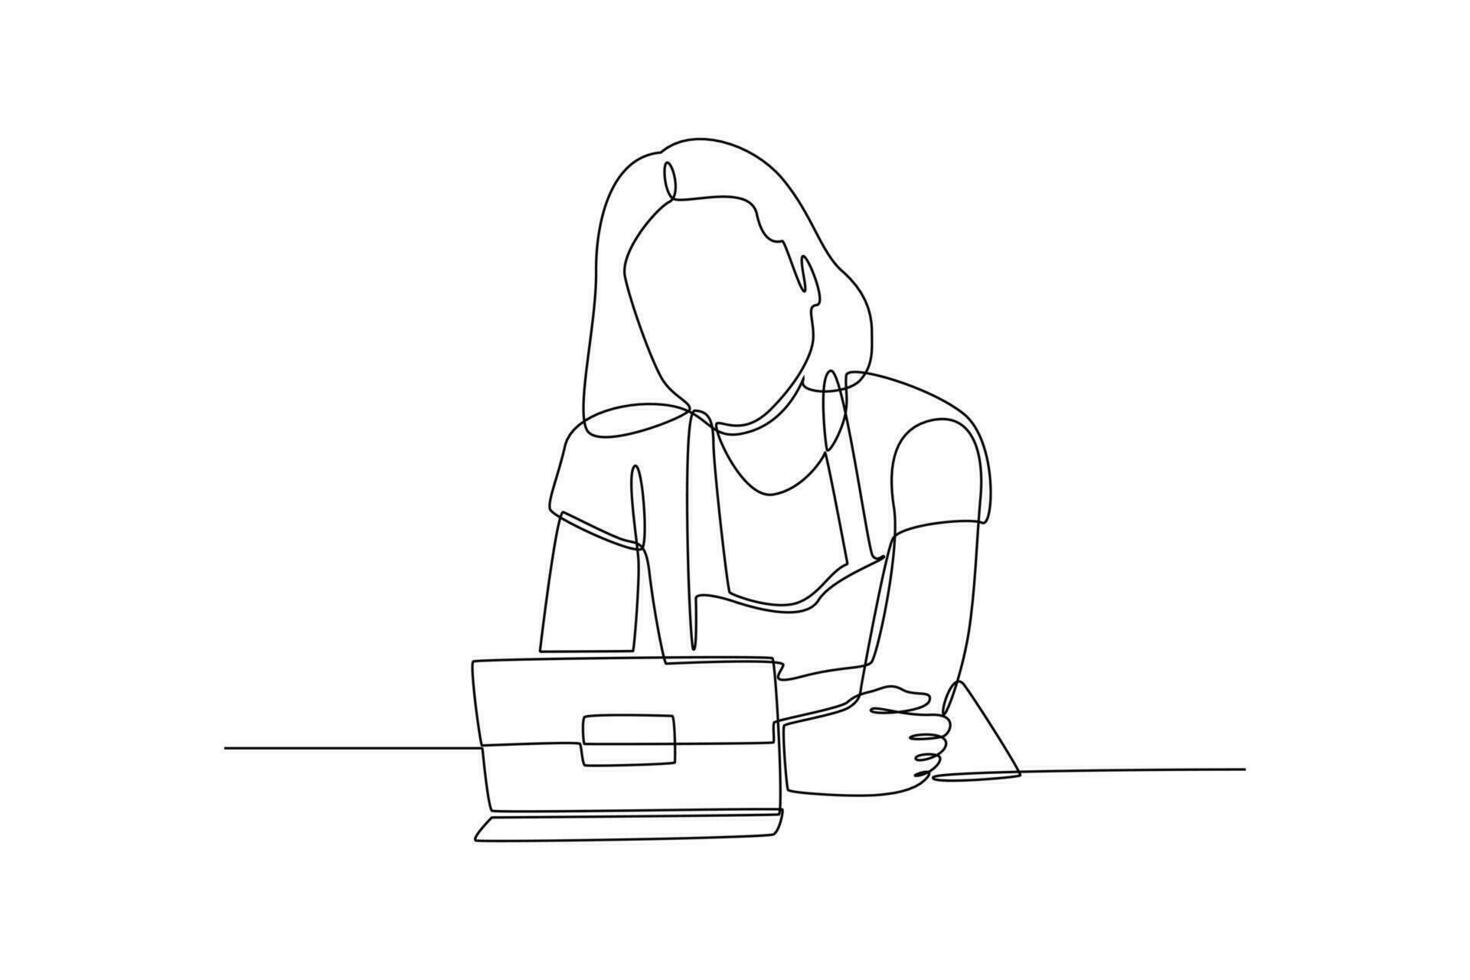 Continuous one line drawing Customers paying at checkout and cashier counters concept. Doodle vector illustration.